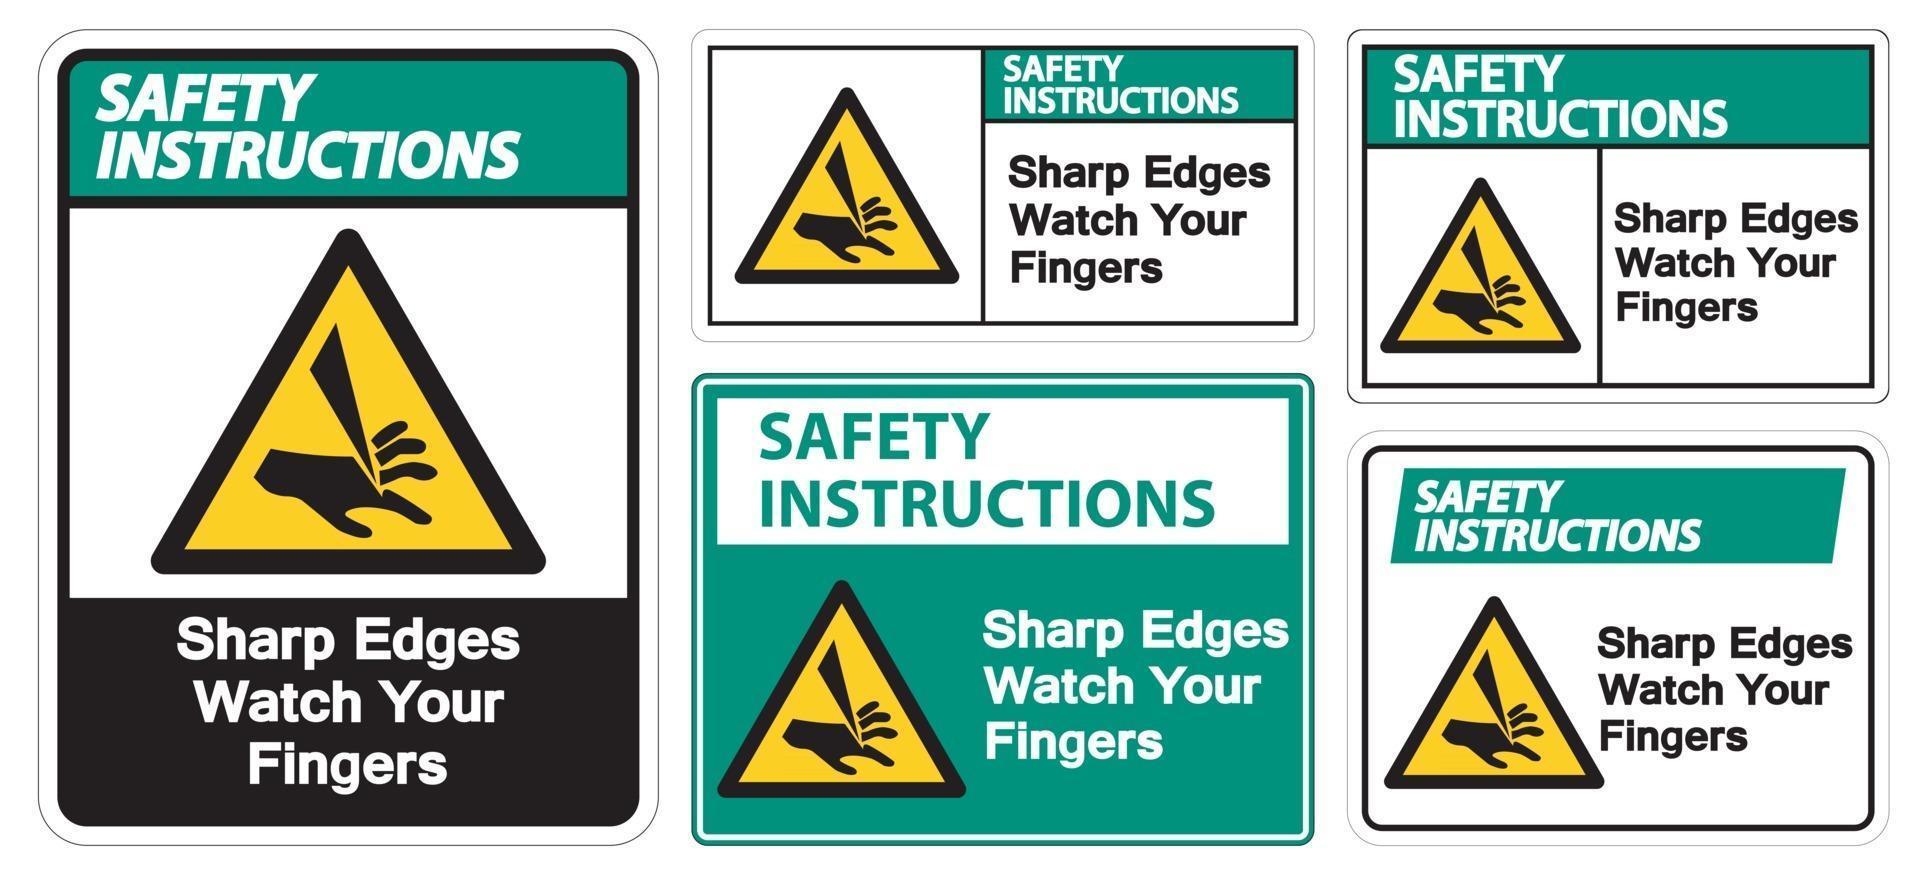 Safety Instructions Sharp Edges Watch Your Fingers Symbol Sign Isolate On White Background,Vector Illustration EPS.10 vector